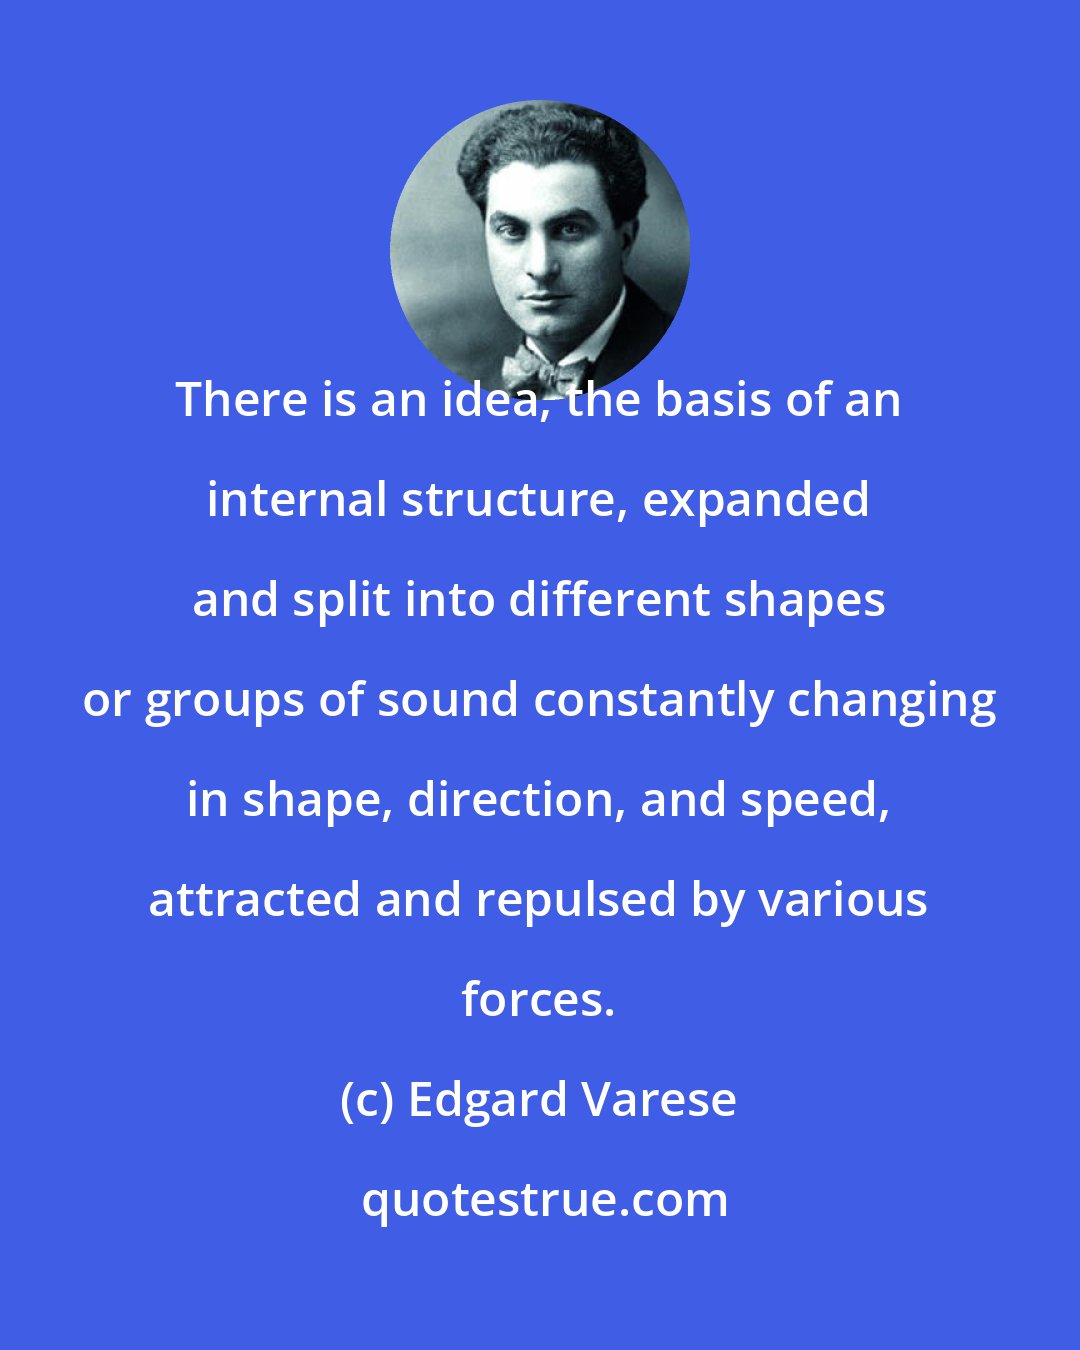 Edgard Varese: There is an idea, the basis of an internal structure, expanded and split into different shapes or groups of sound constantly changing in shape, direction, and speed, attracted and repulsed by various forces.